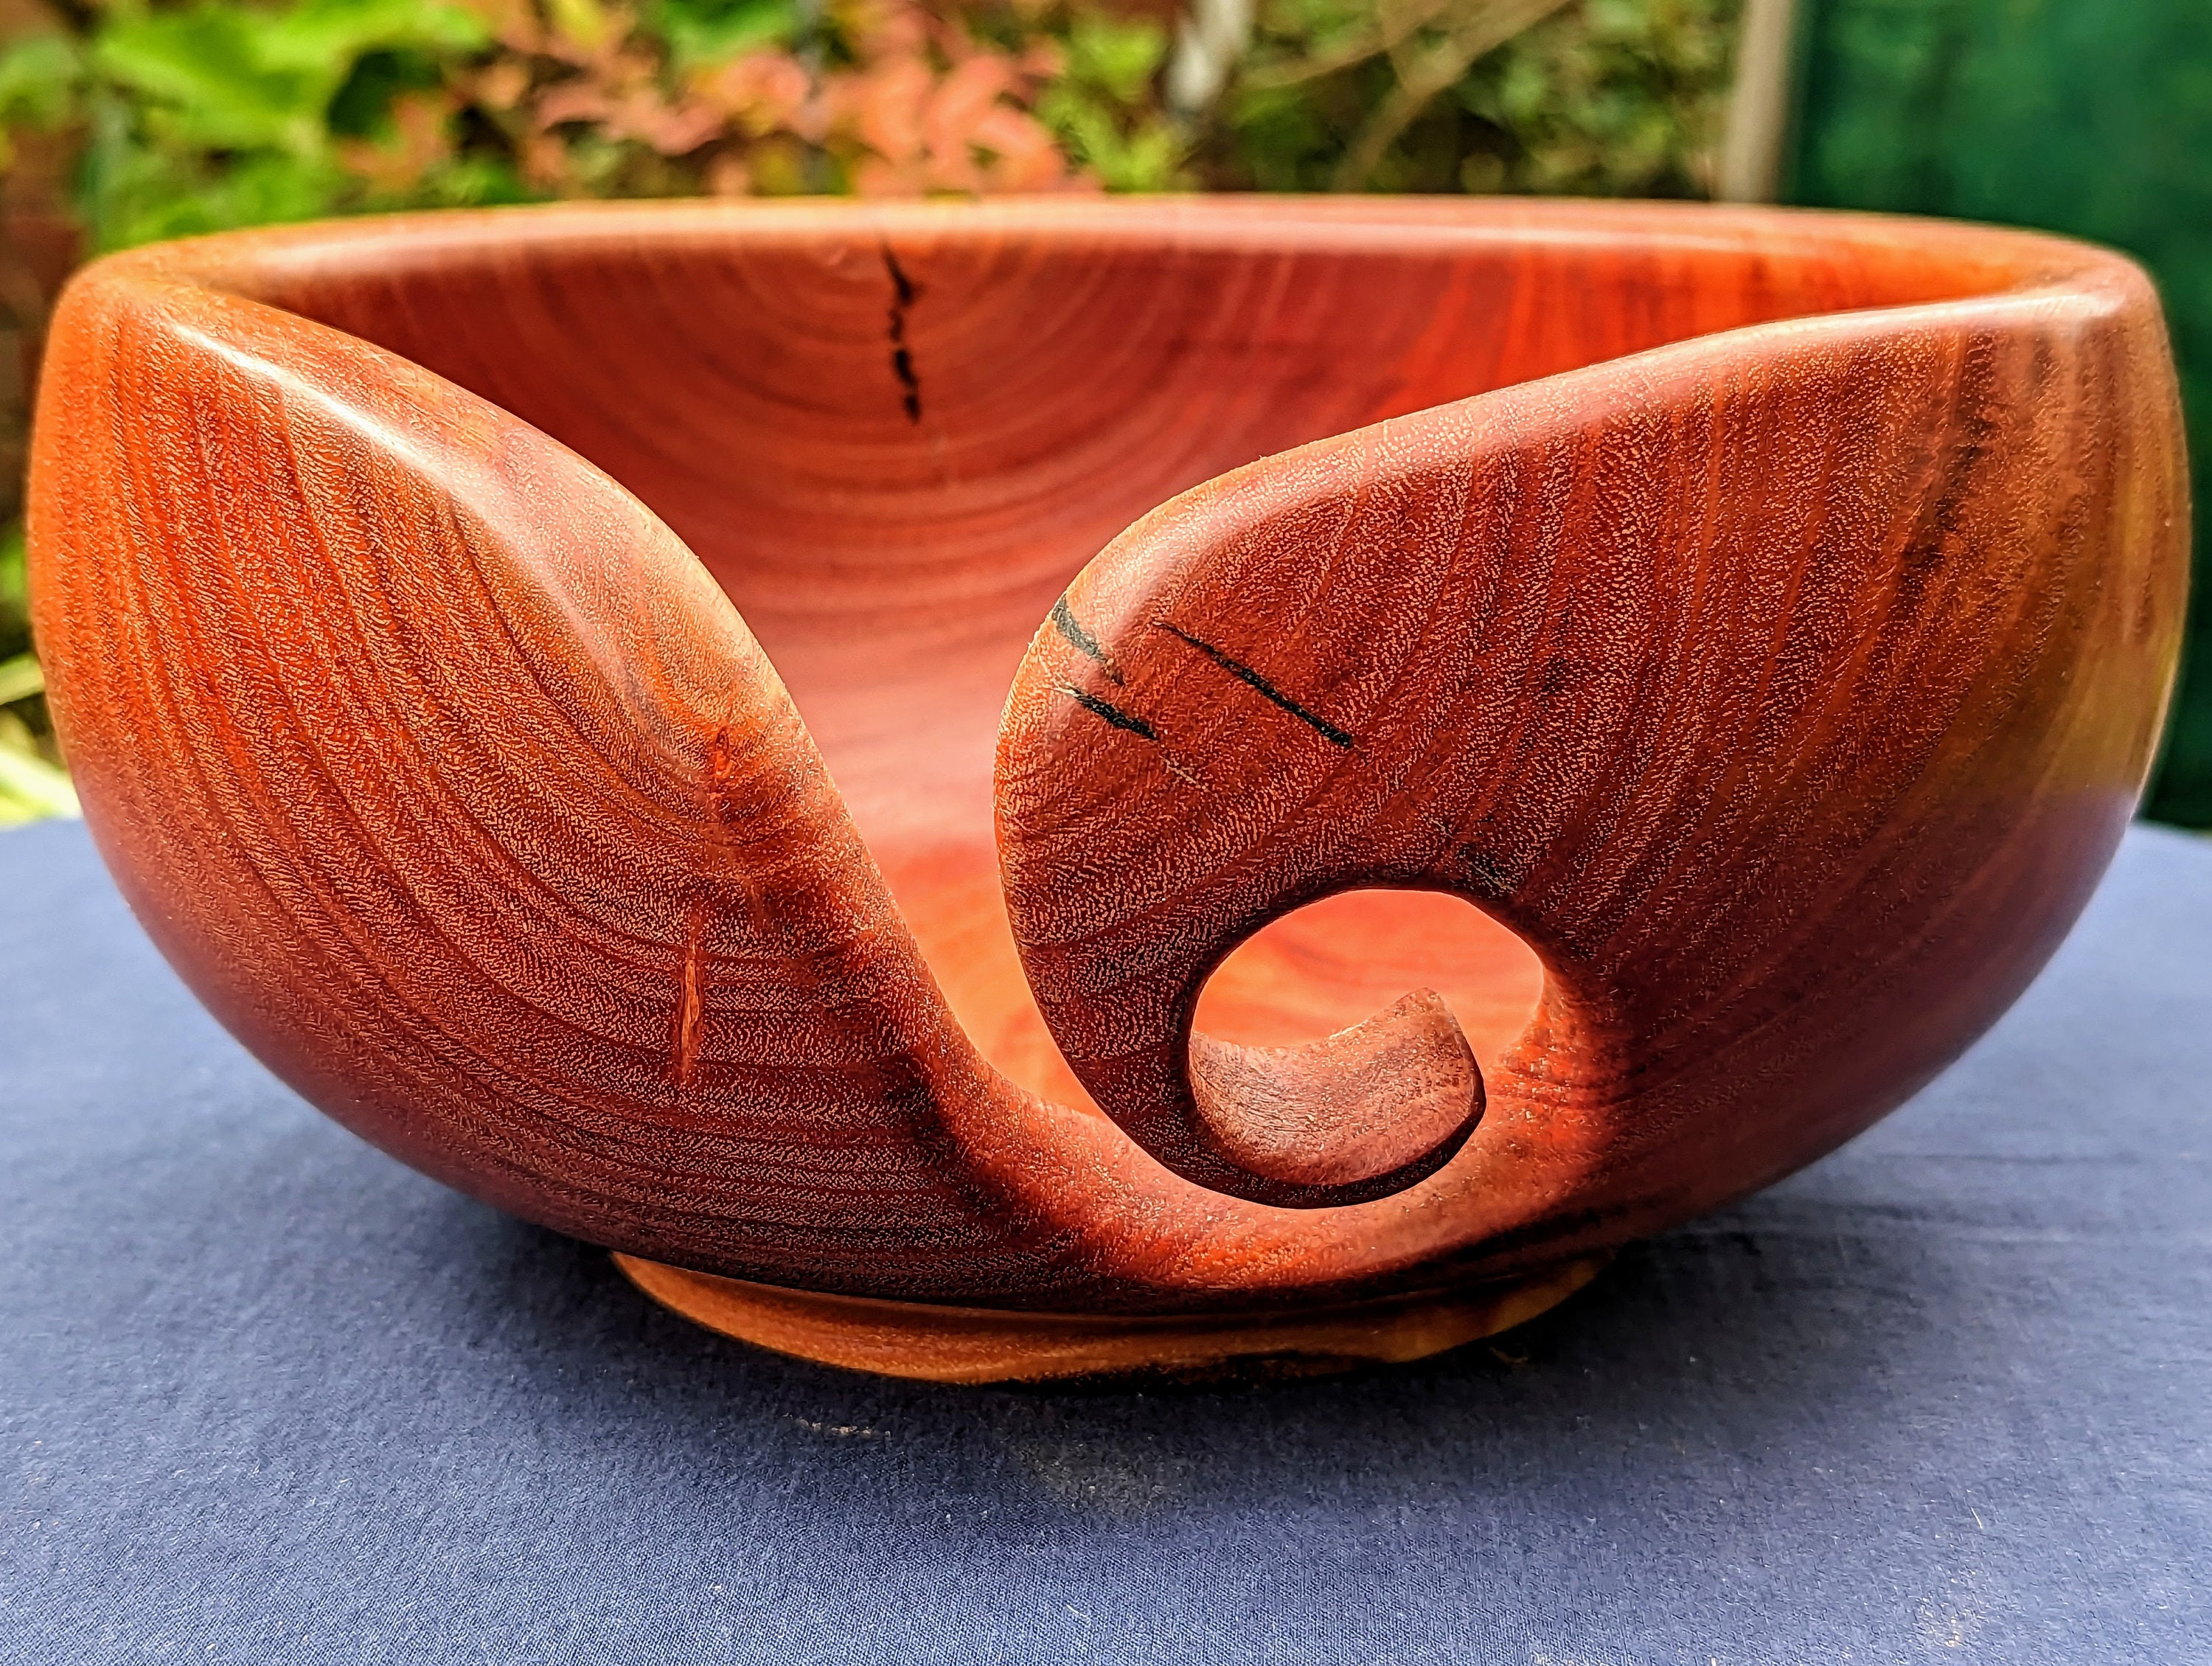 Handmade Olive Wood Yarn Bowl, Crochet Bowl, Knitting Bowl, Made of Olive  Wood, With Rich Grain, by Josef Woodturner 